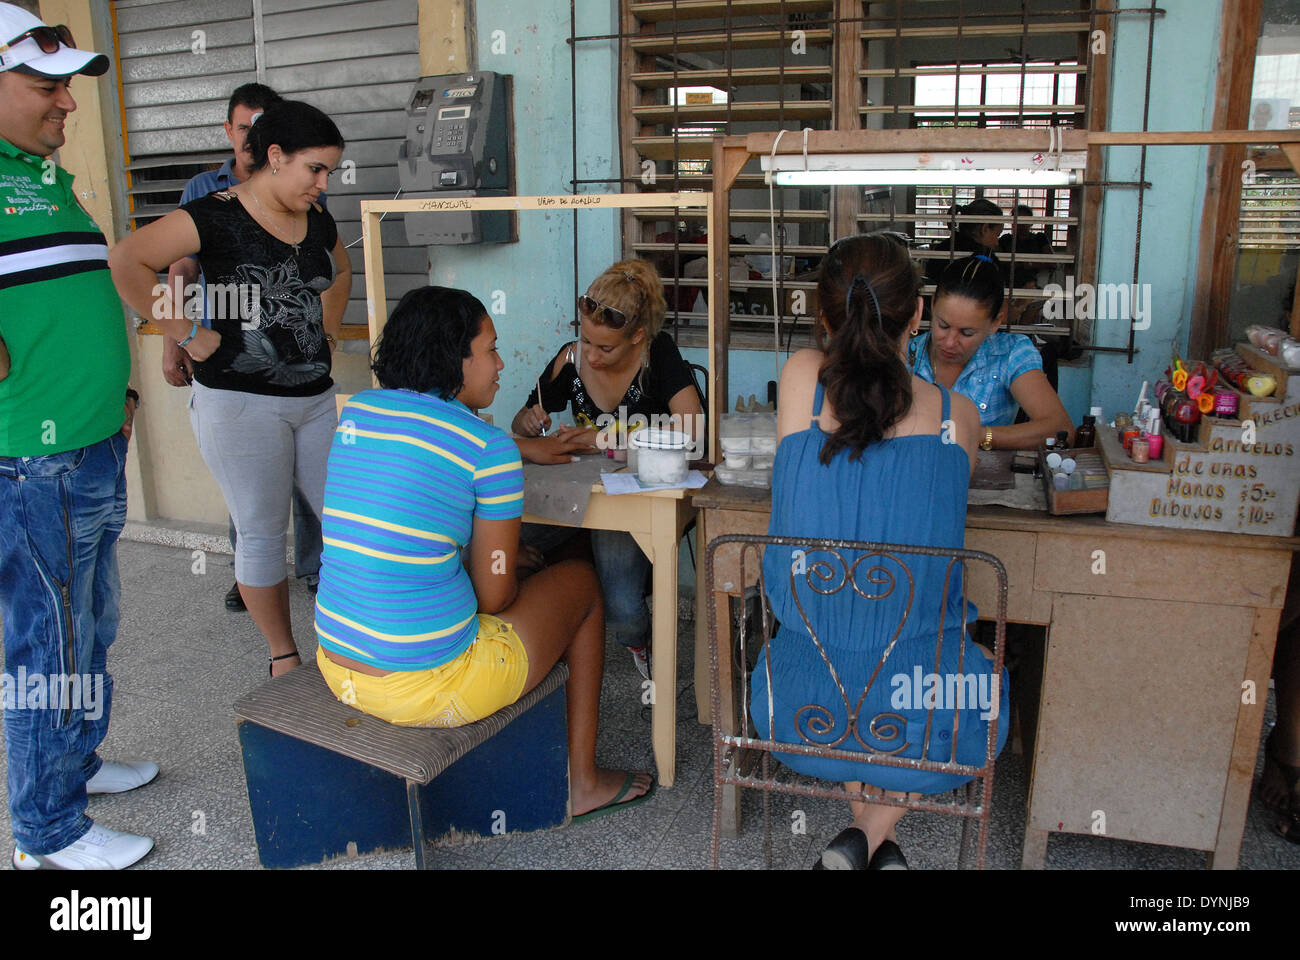 Outdoor nail bar in the city of Holguin, Cuba, with two customers being attended to. Stock Photo